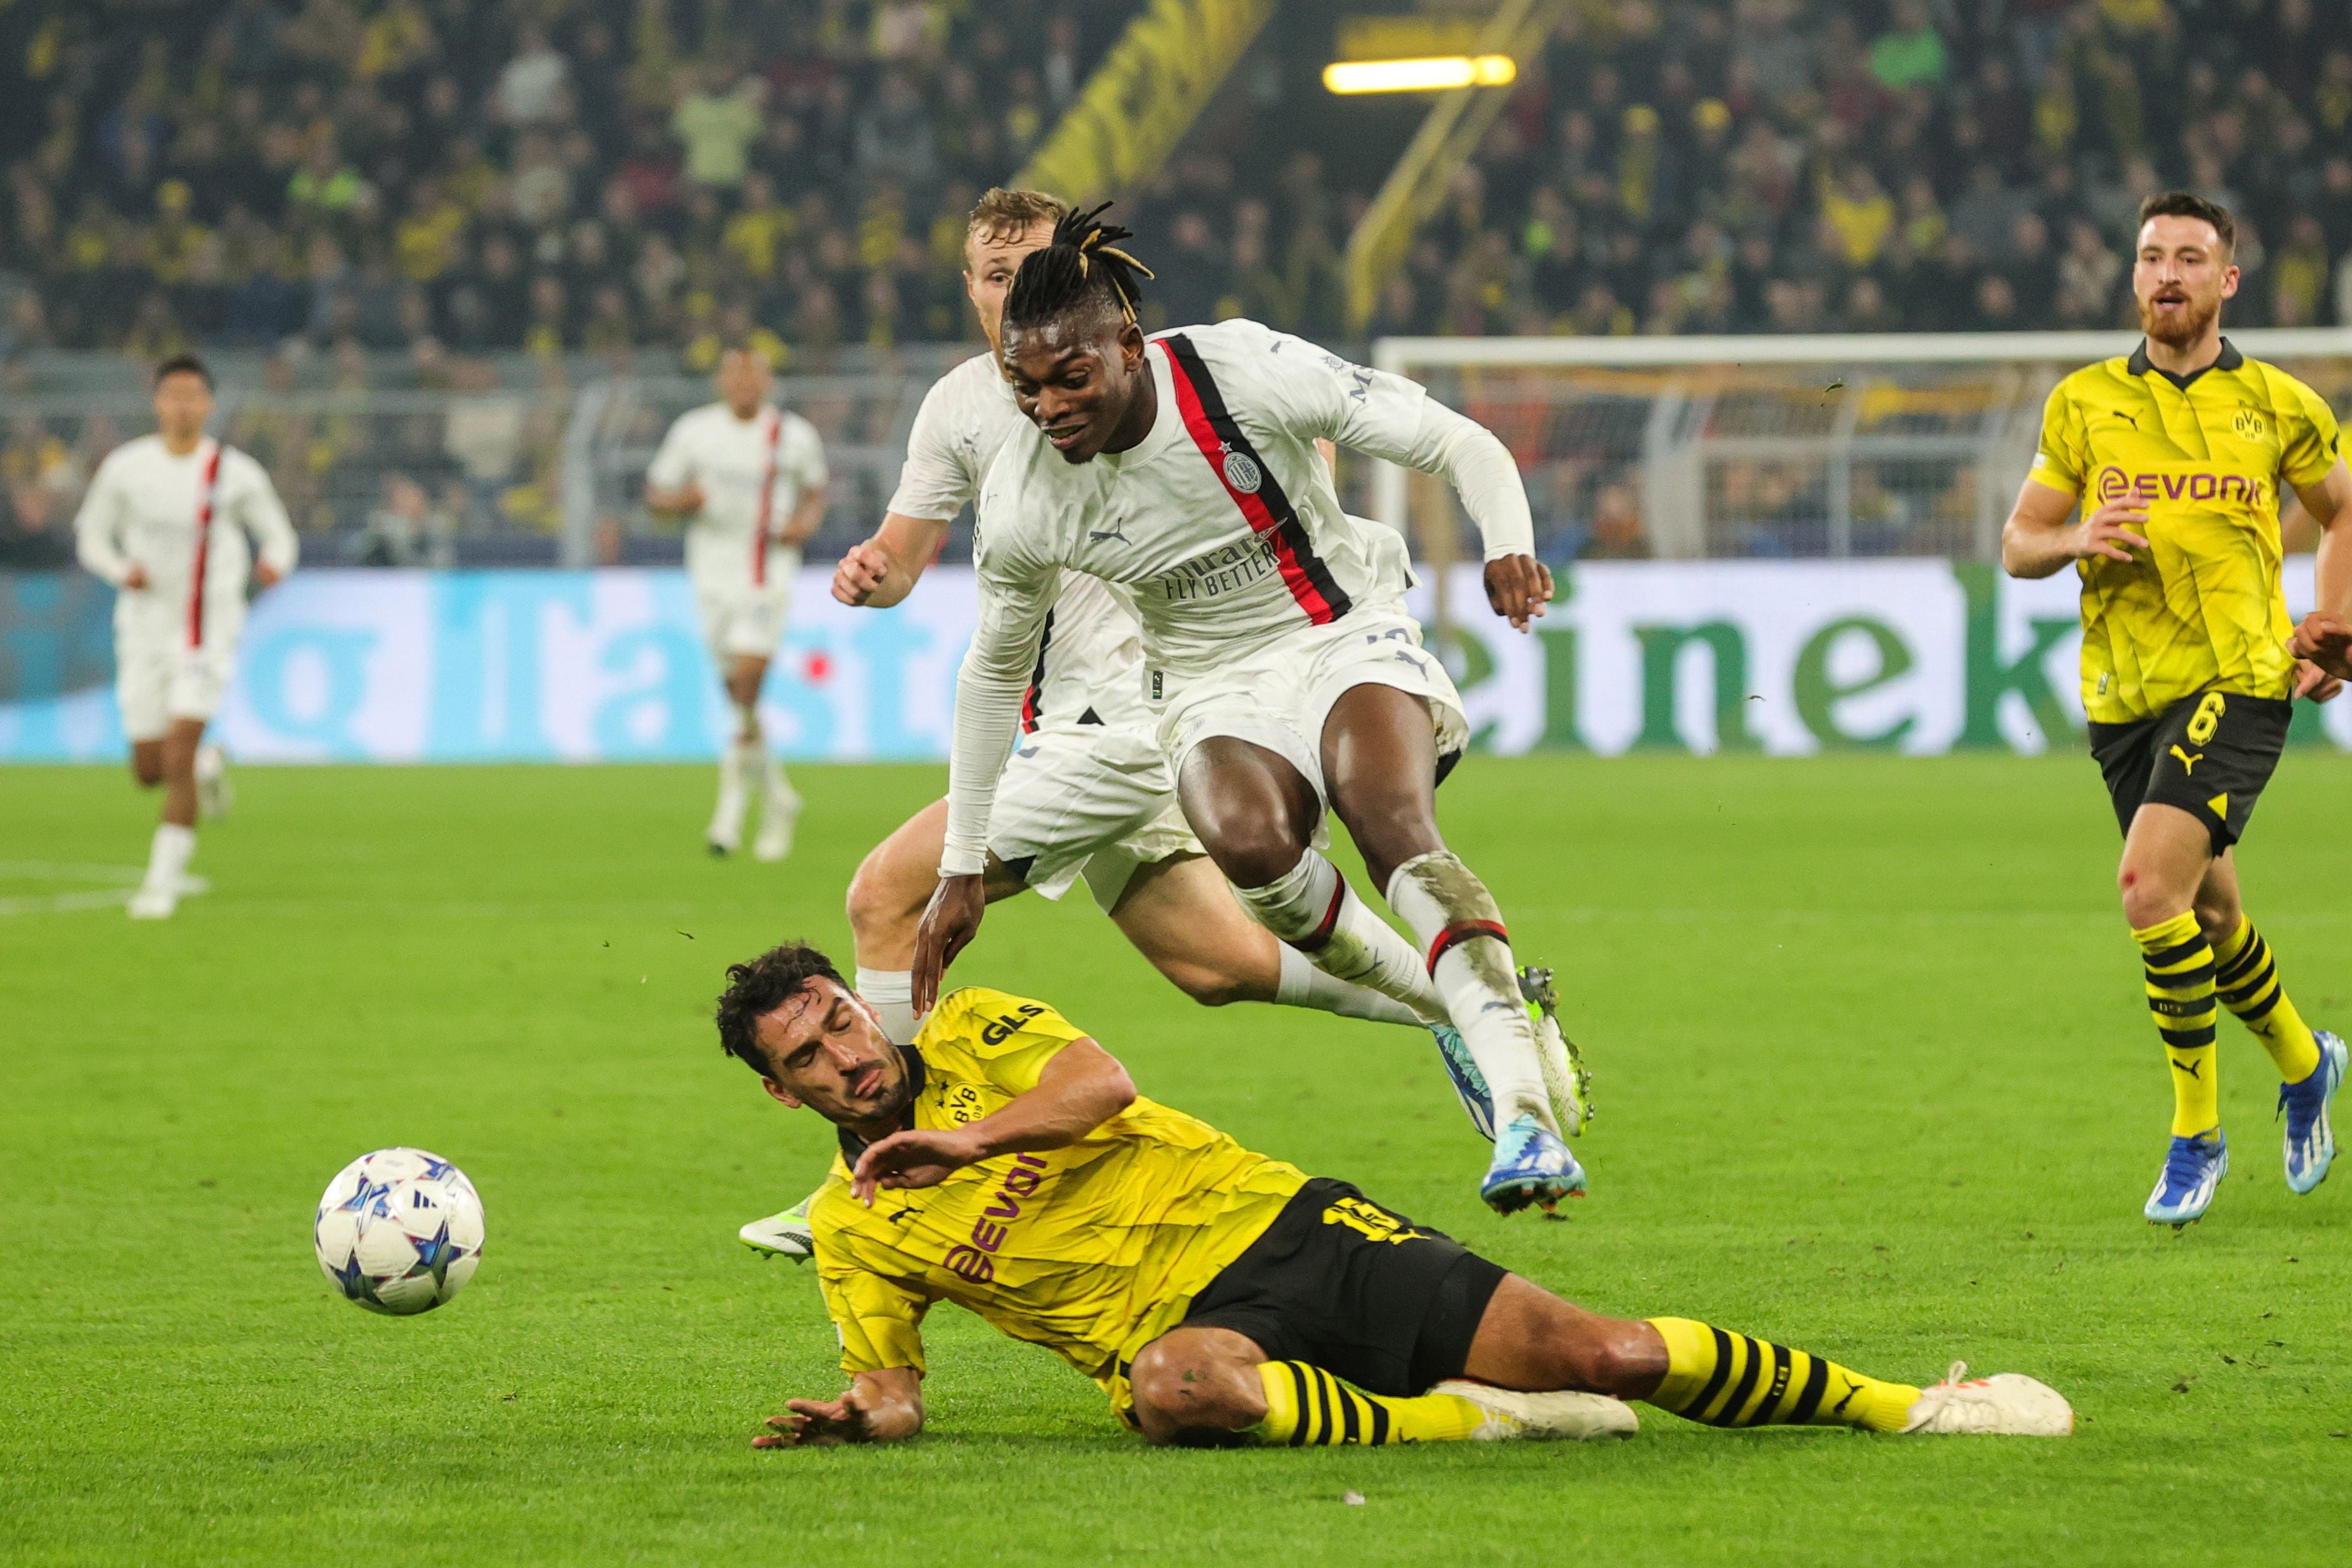 Dortmund (Germany), 04/10/2023.- Dortmund's Mats Hummels (L) and Milan's Rafael Leao (R) in action during the UEFA Champions League Group F match between Borussia Dortmund and AC Milan in Dortmund, Germany, 04 October 2023. (Liga de Campeones, Alemania, Rusia) EFE/EPA/FRIEDEMANN VOGEL
